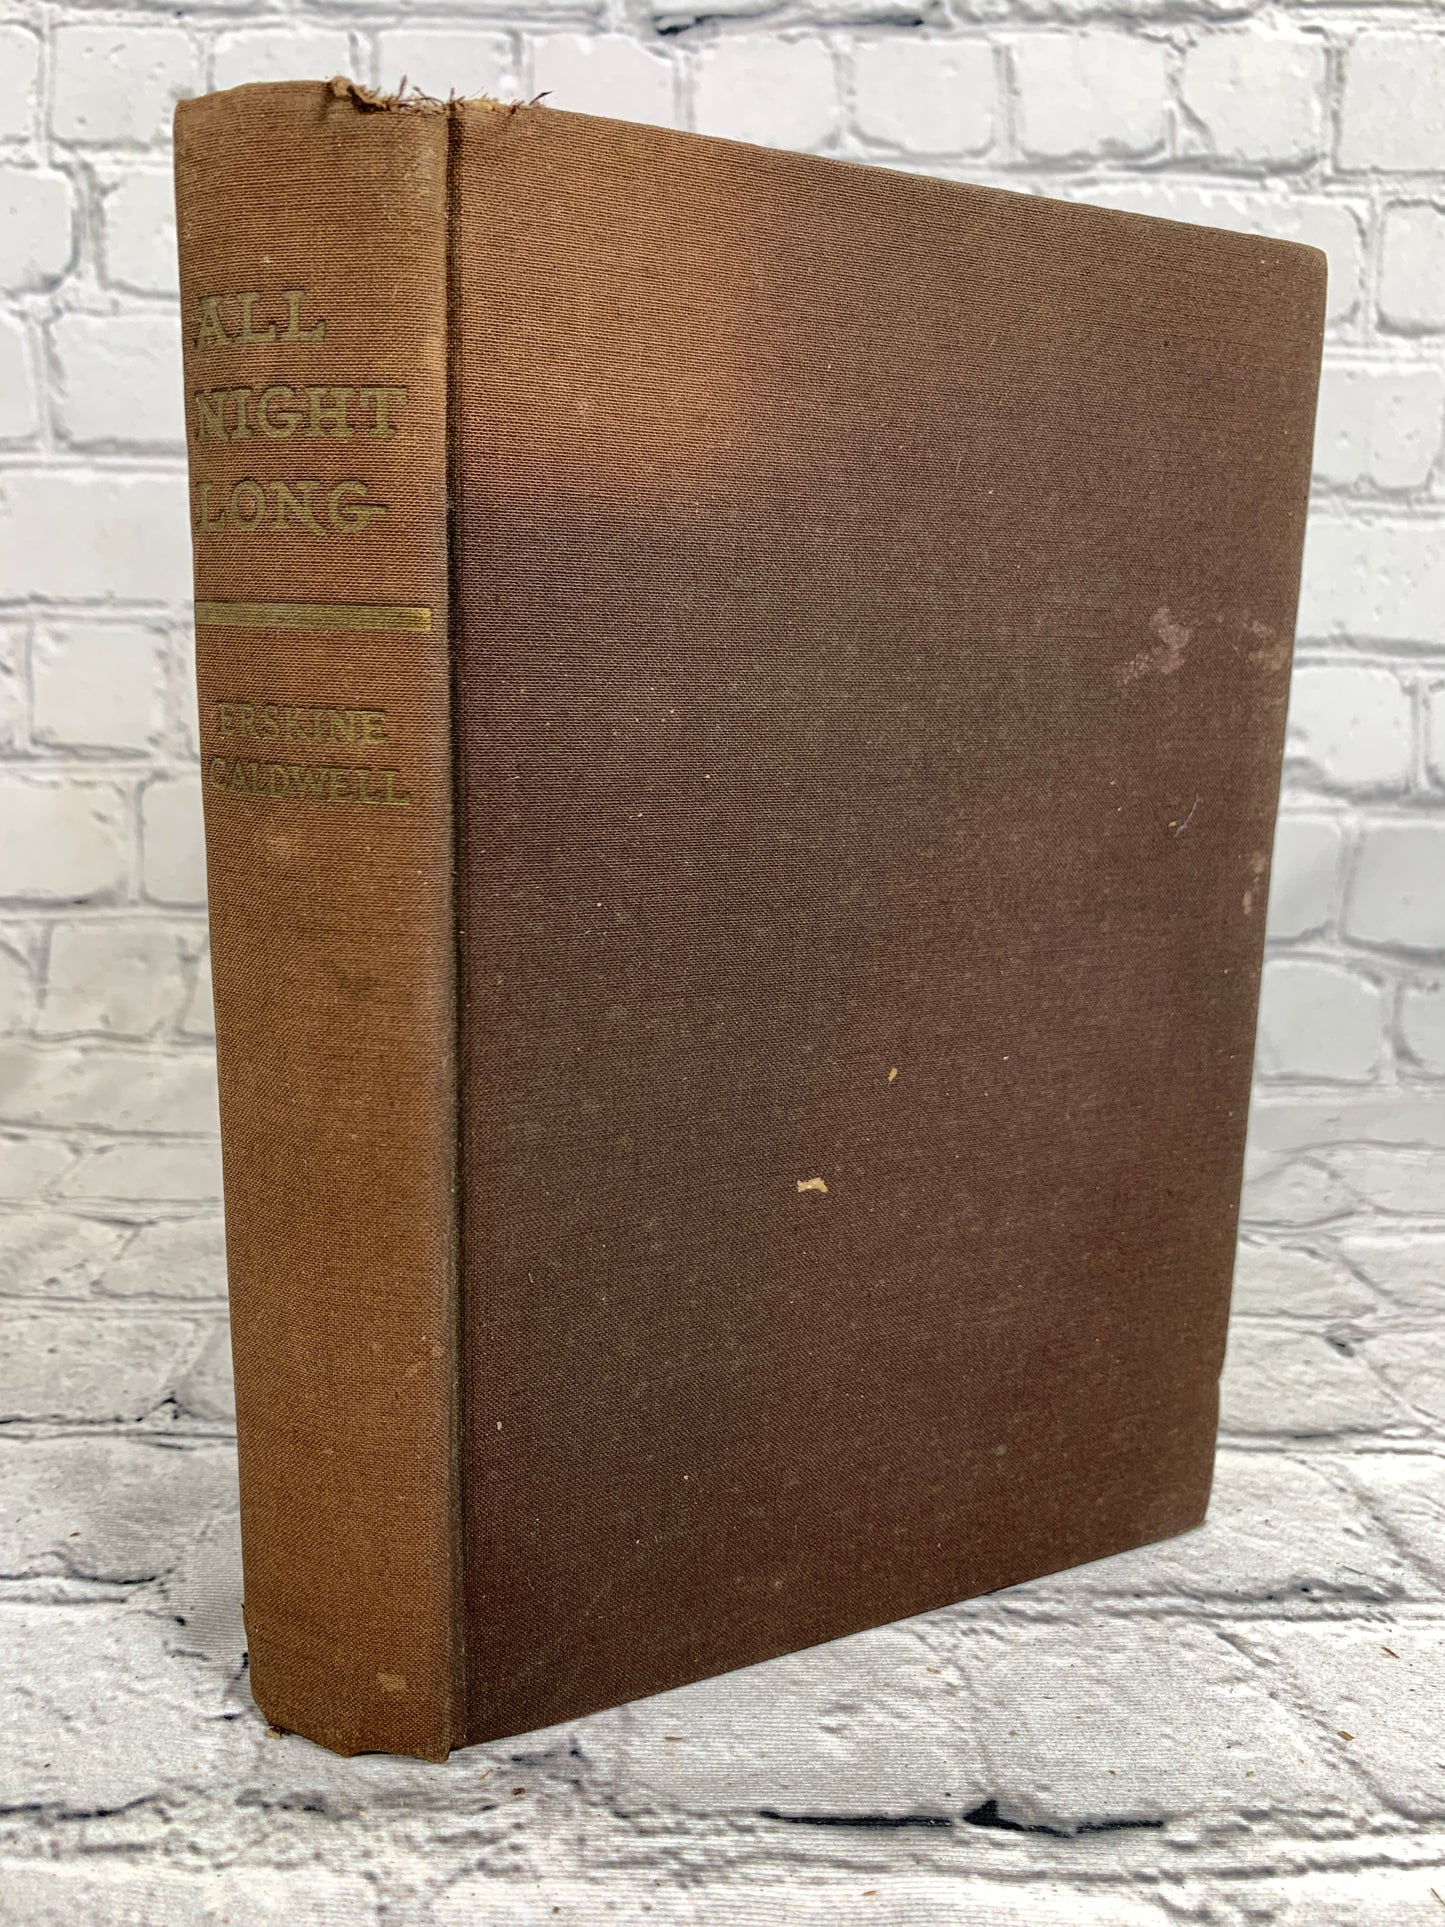 All Night Long Erskine Caldwell Hard Cover  [1942 · Book League of America]